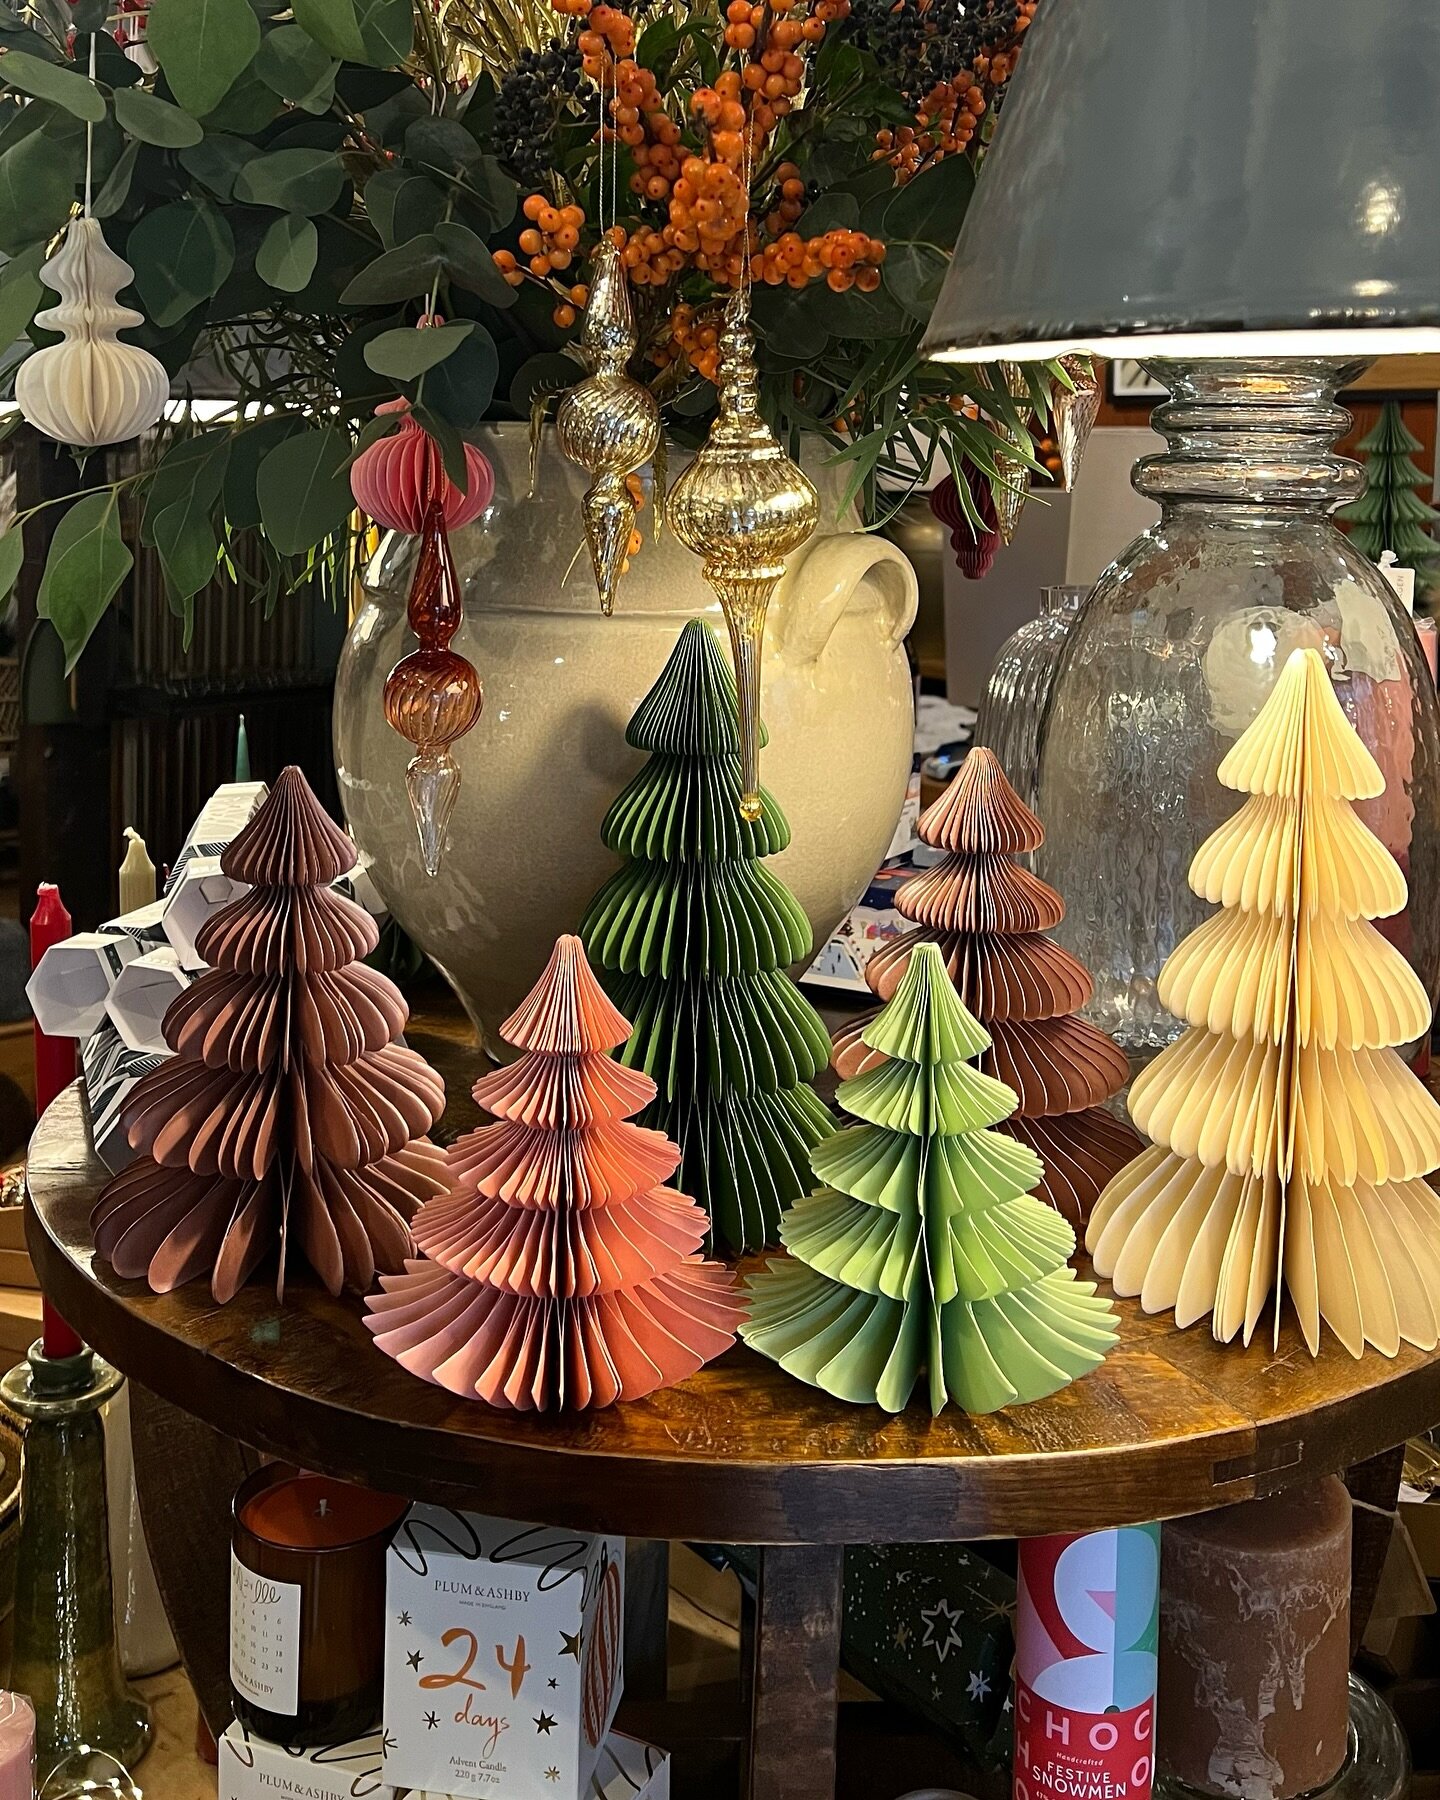 Christmas countdown officially starts tomorrow and I have two very excited little ones! Our paper trees make the most stunning winter forest 🌲🎄❄️ #paperdecoration #christmasiscoming🎄 #christmasdecor #xmasgifting #shoplocal #rutland #uppingham #lei